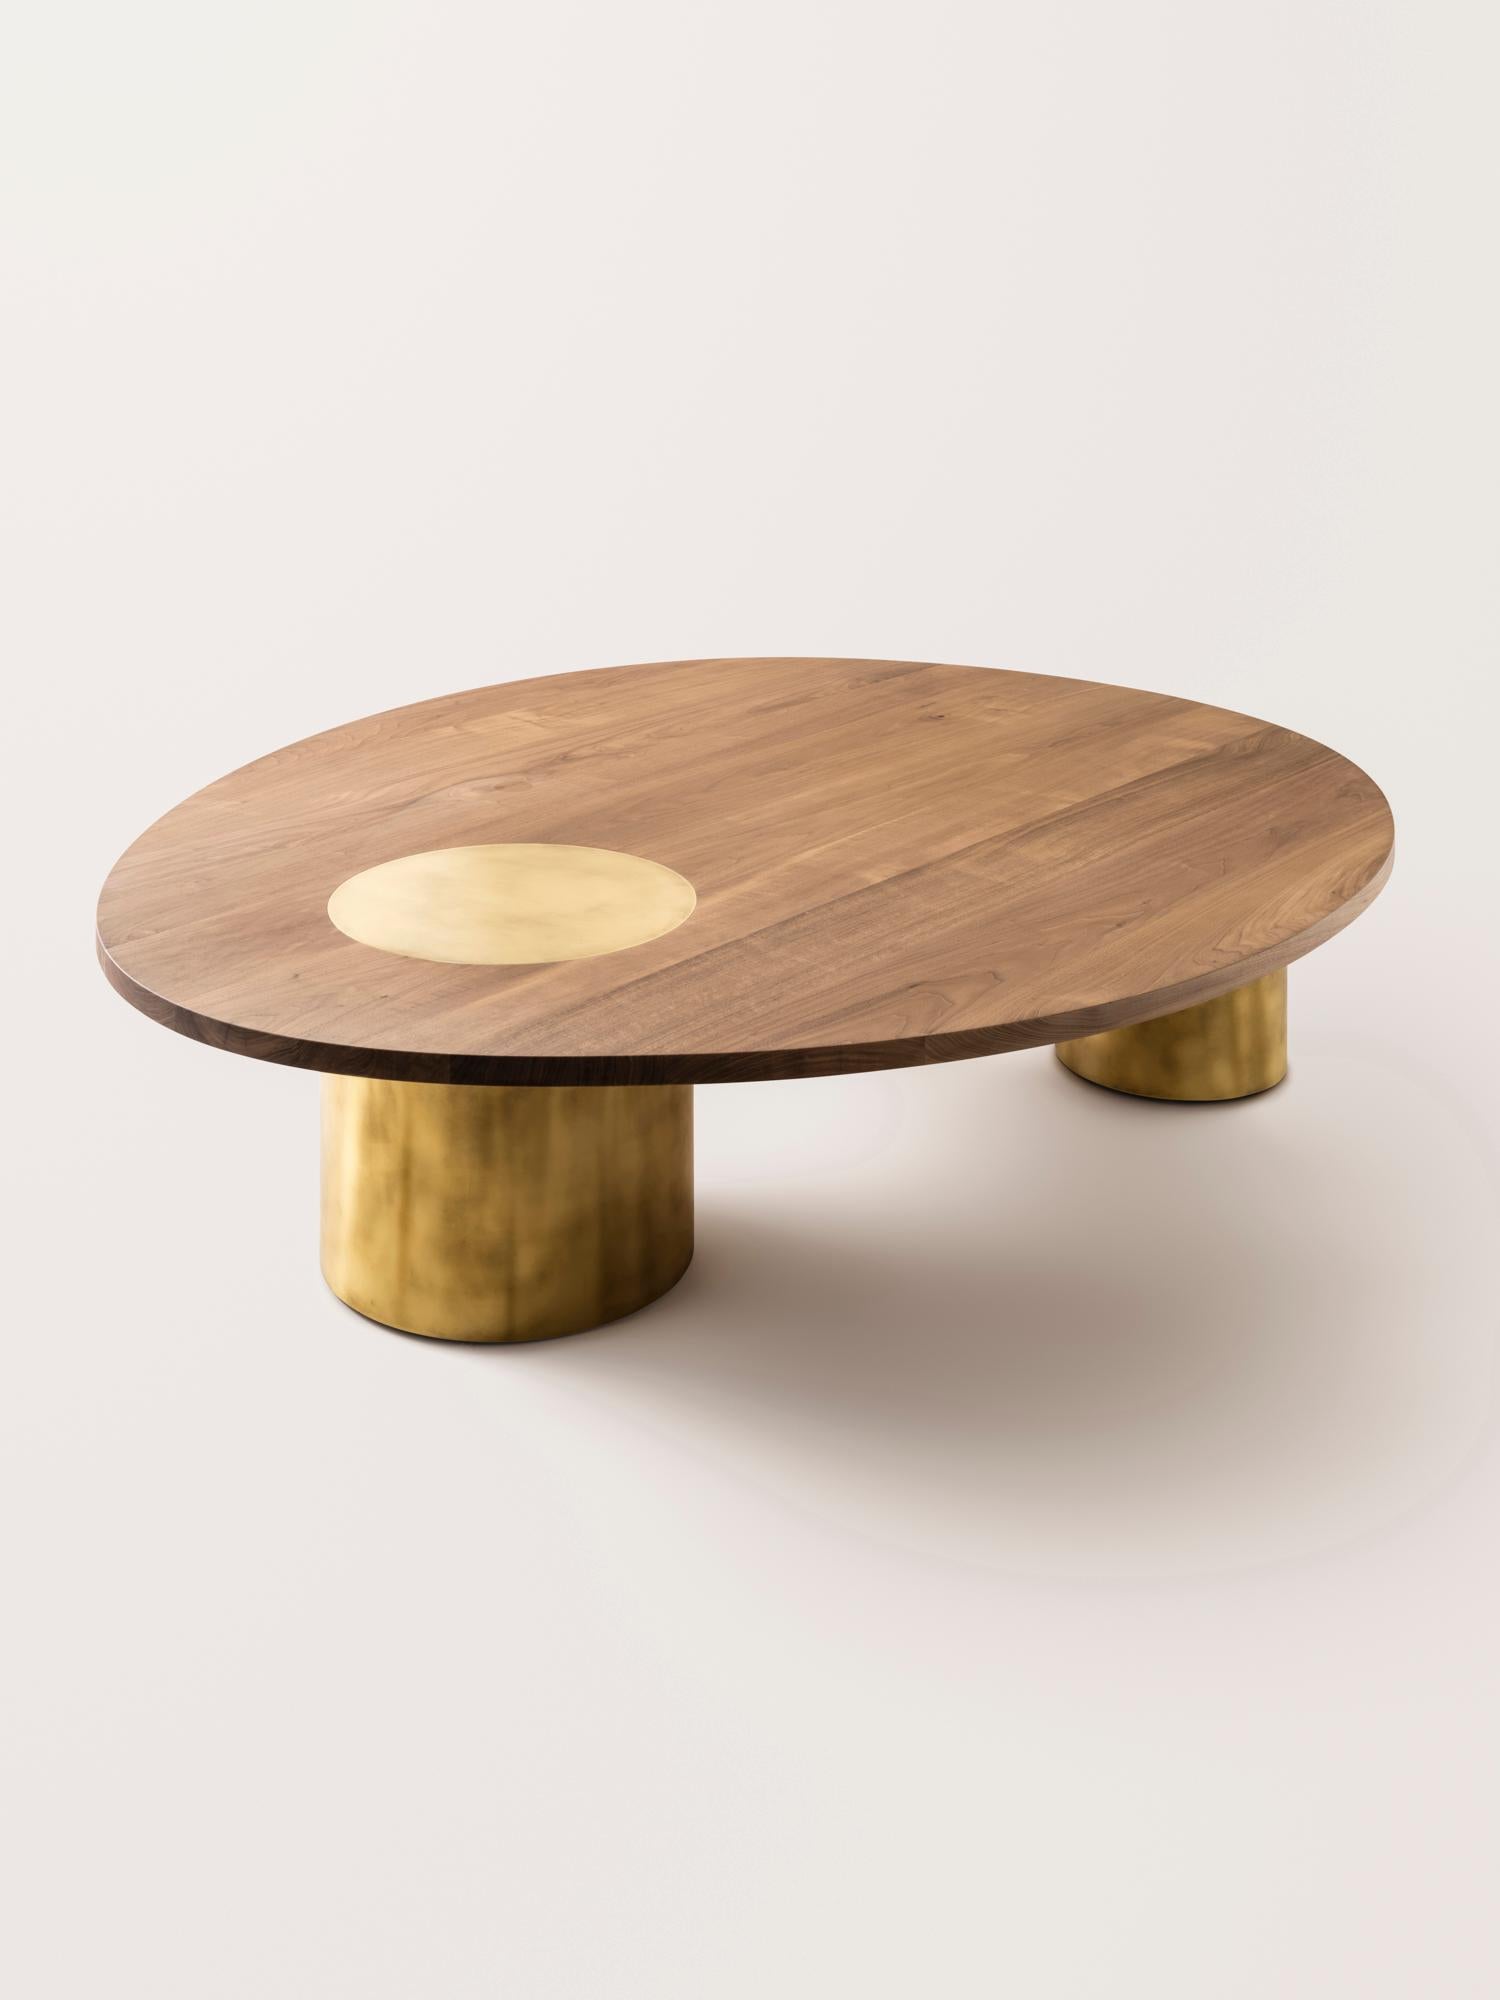 American Silo Coffee Table X-Large - Bleached Walnut and Burnished Brass For Sale